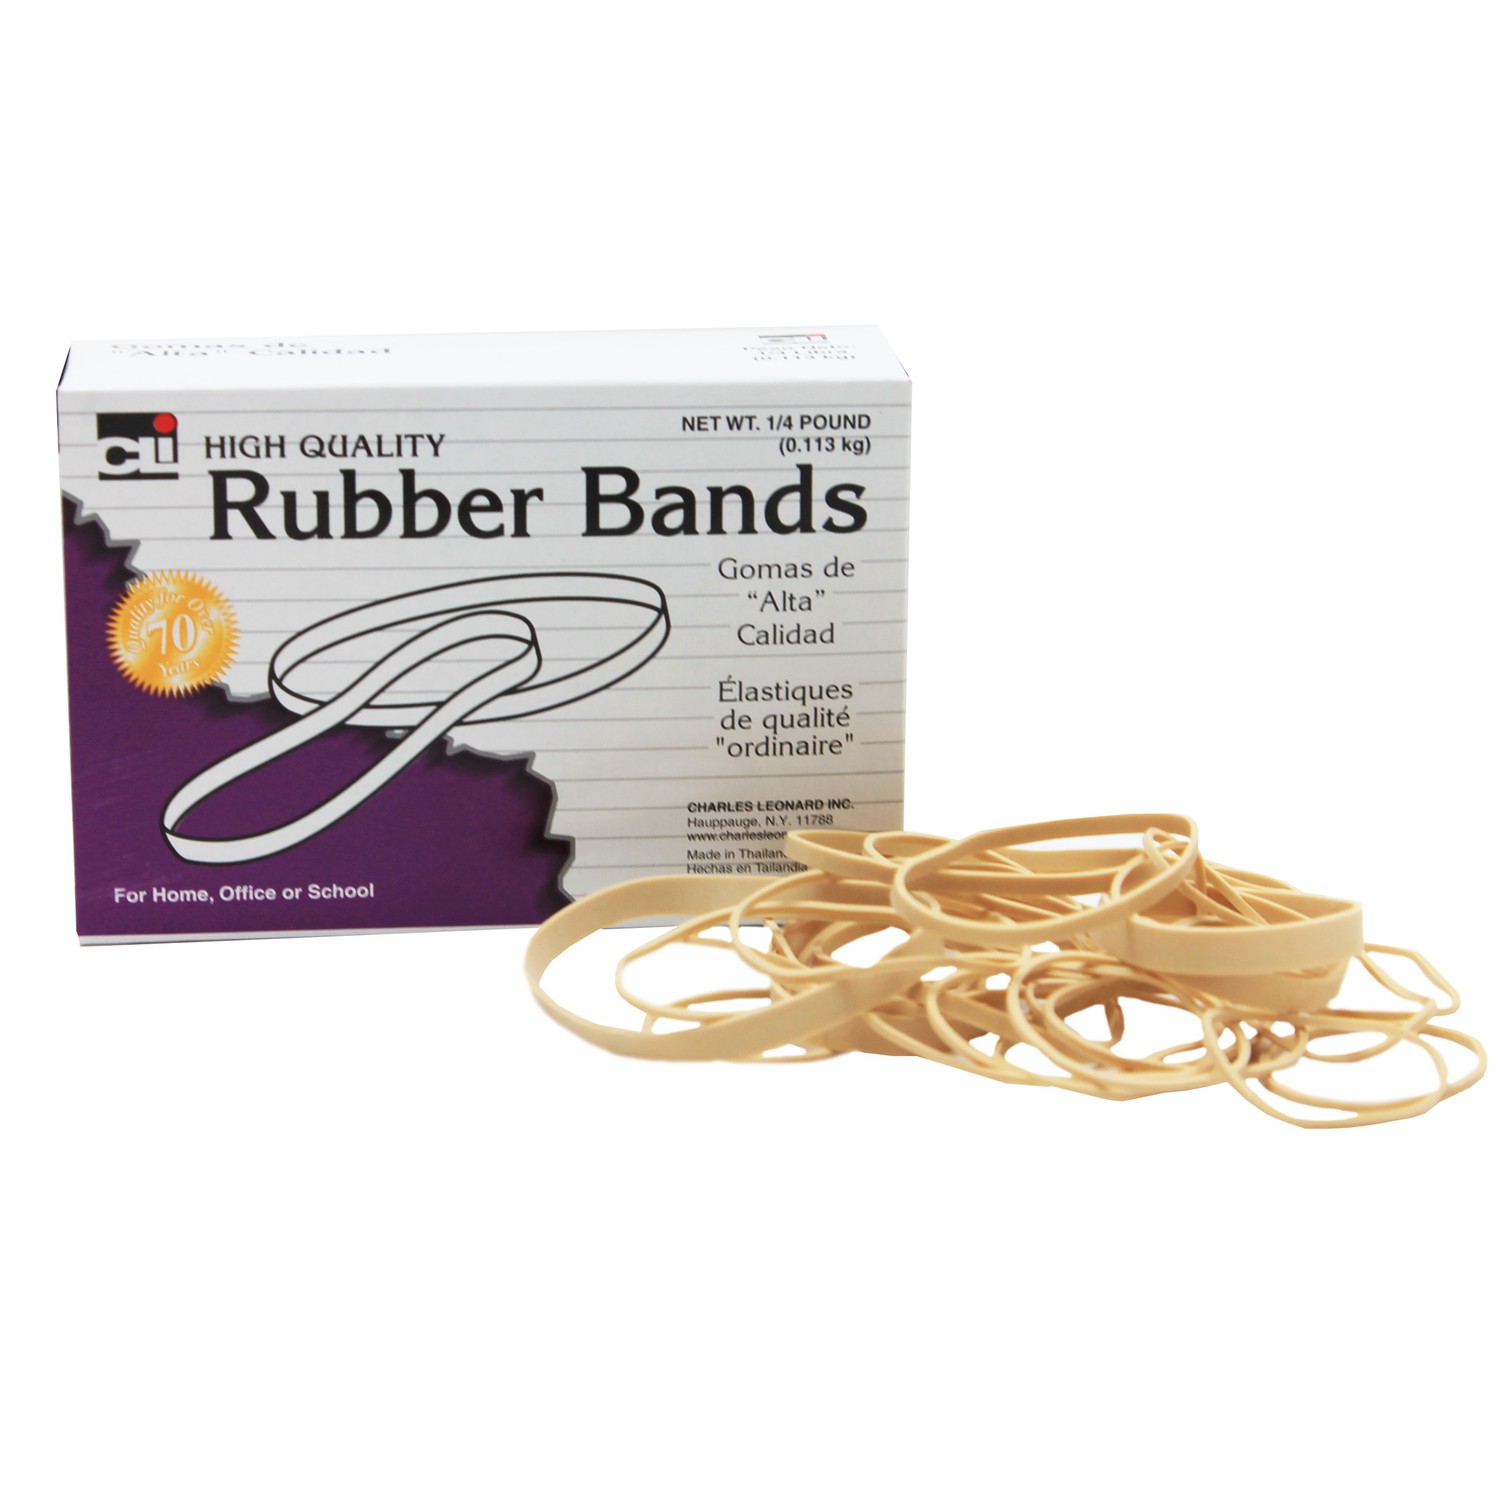 Rubber Bands, Assorted Sizes, 1/4 lb. Box